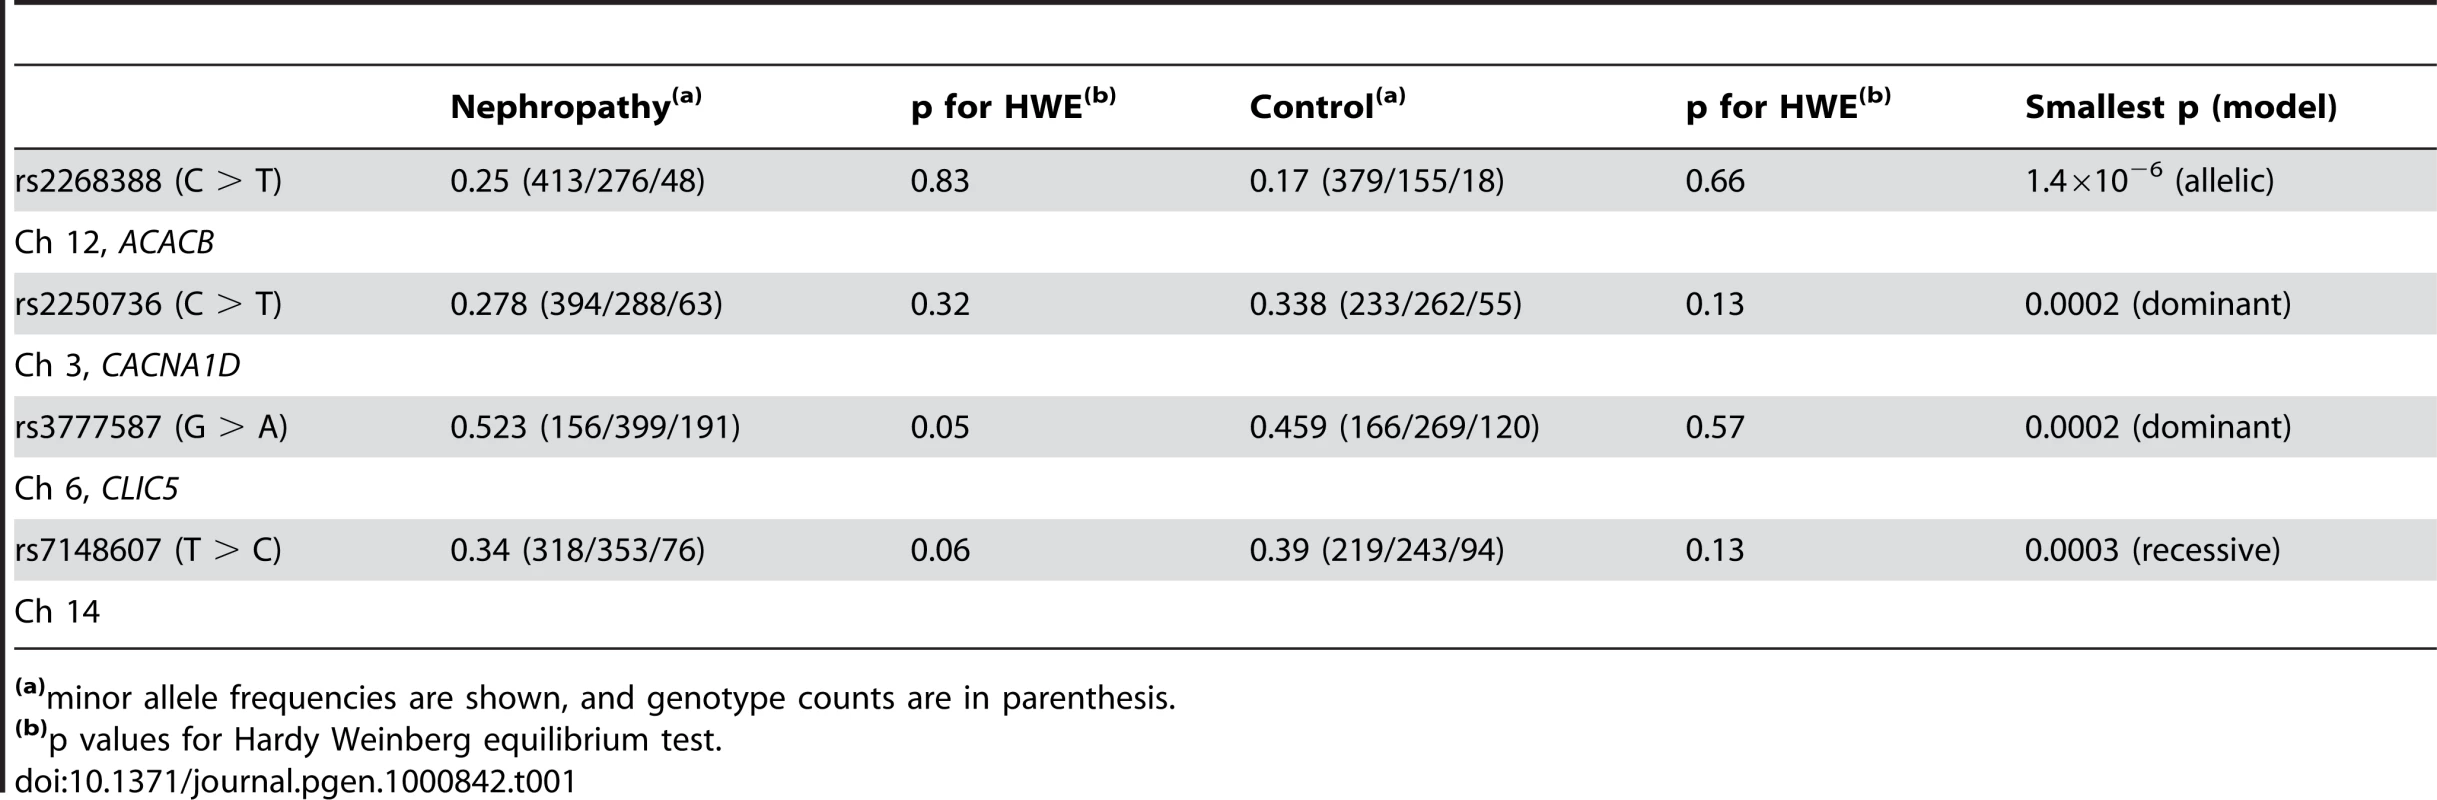 Top 4 SNPs associated with diabetic nephropathy in a genome-wide screening.